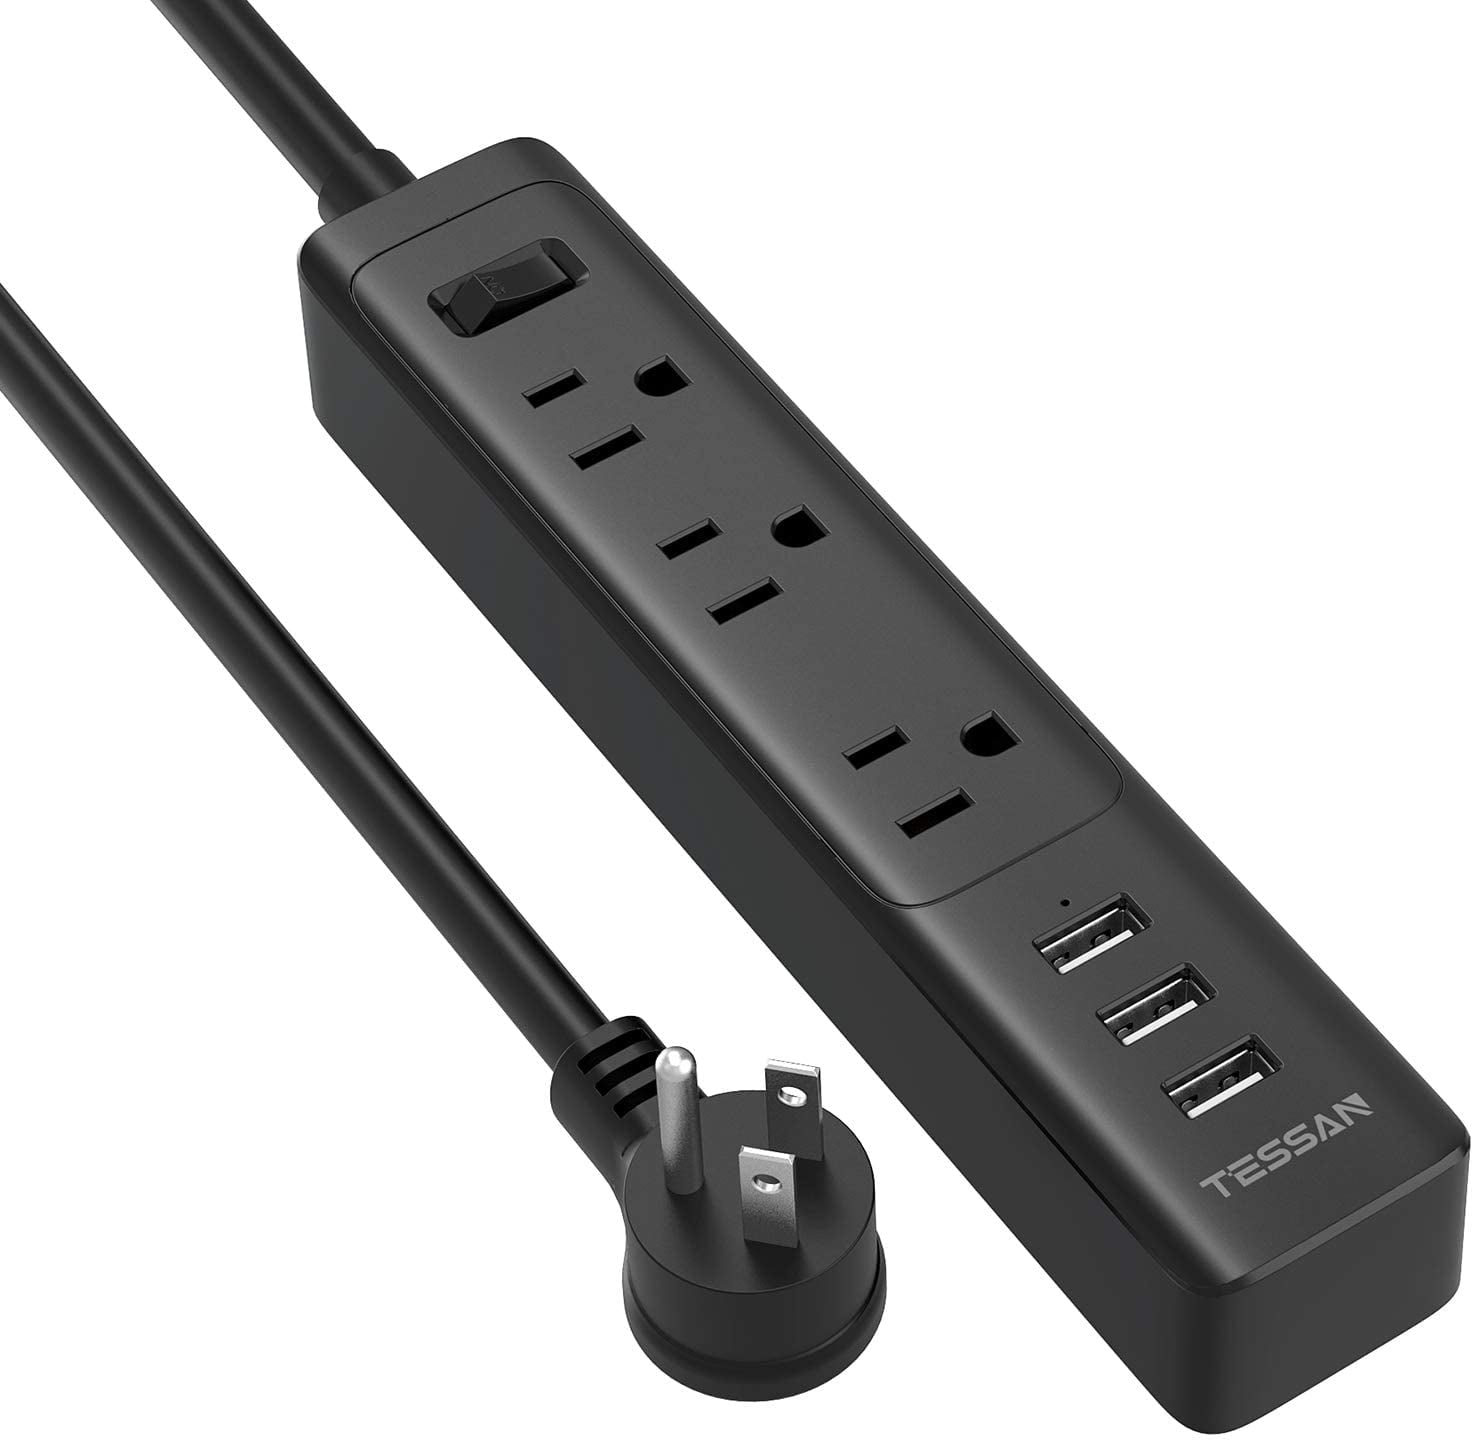 Flat Plug Power Strip with 6 Widely Spaced Outlets and 3 USB Ports 10 Feet Extension Cord Indoor TESSAN Surge Protector Power Bar with USB Desktop Charging Station Wall Mount for Home Office Dorm